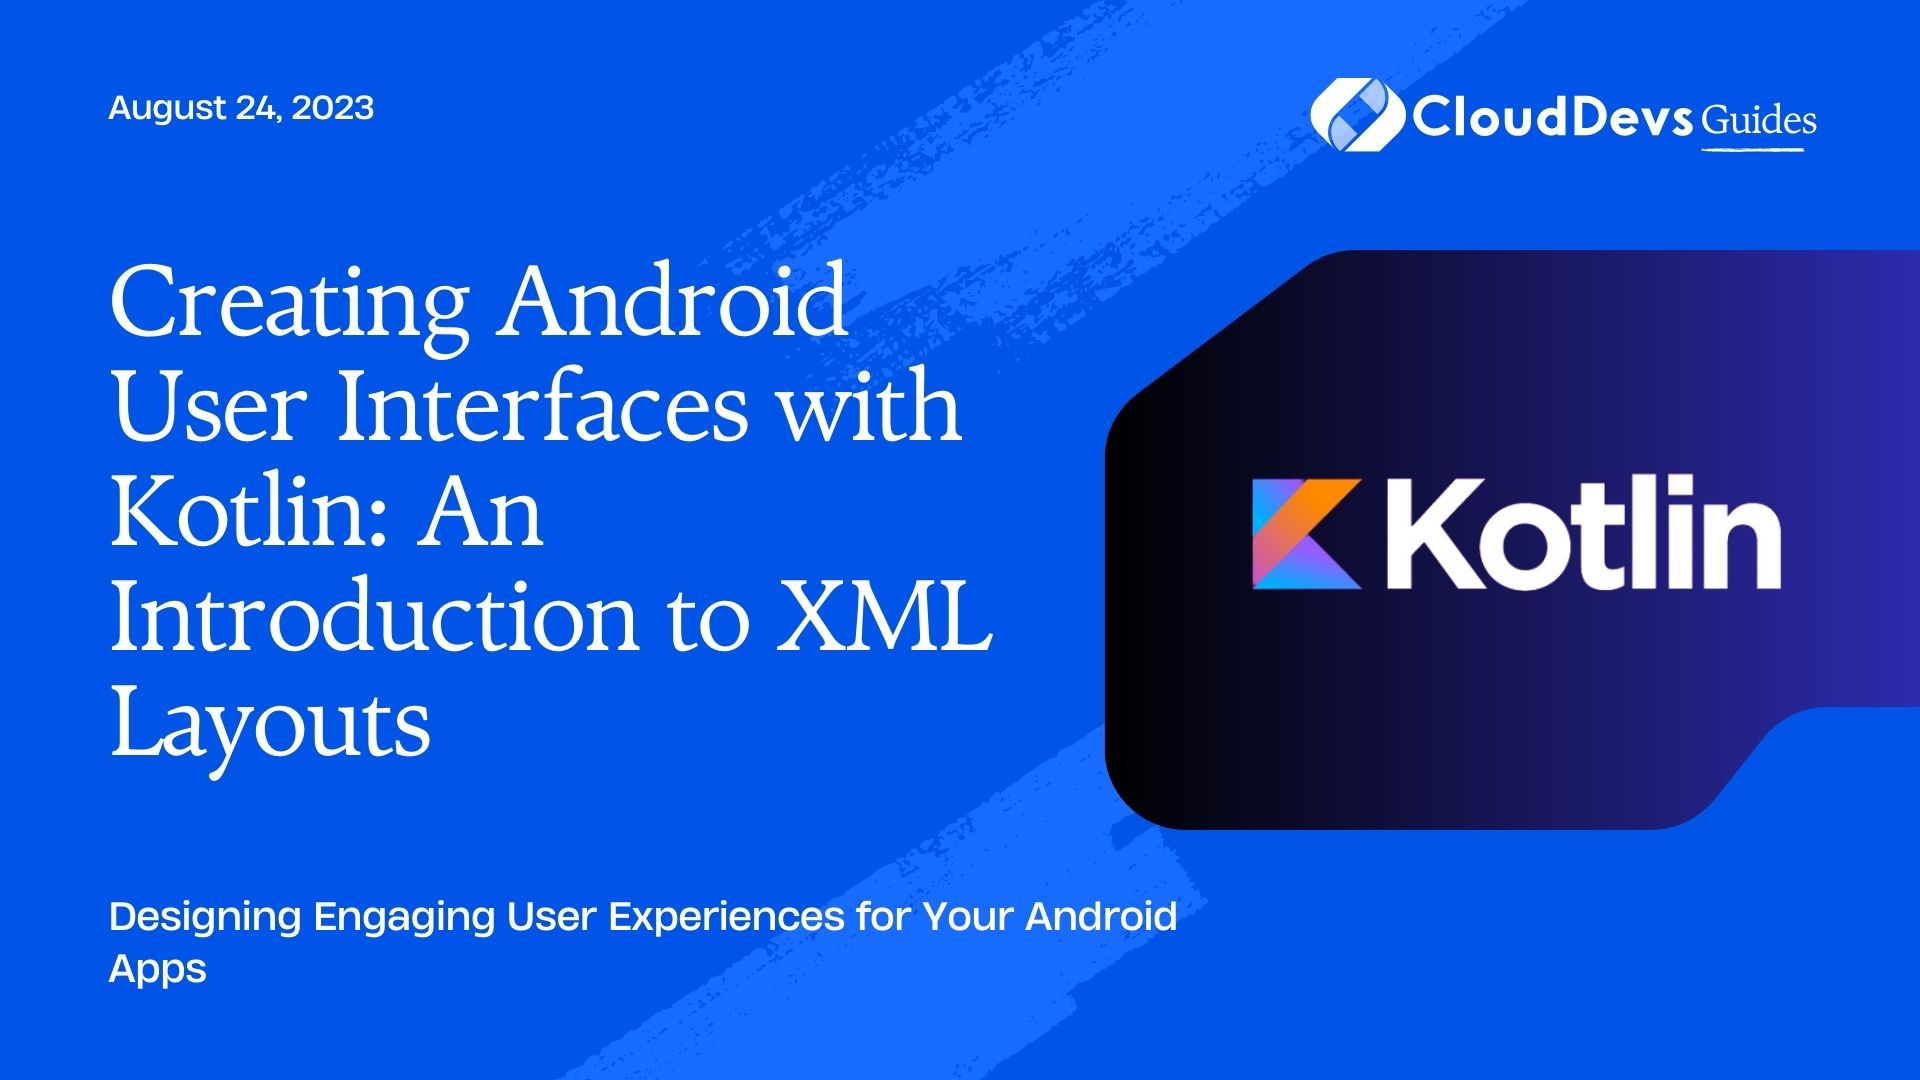 Creating Android User Interfaces with Kotlin: An Introduction to XML Layouts